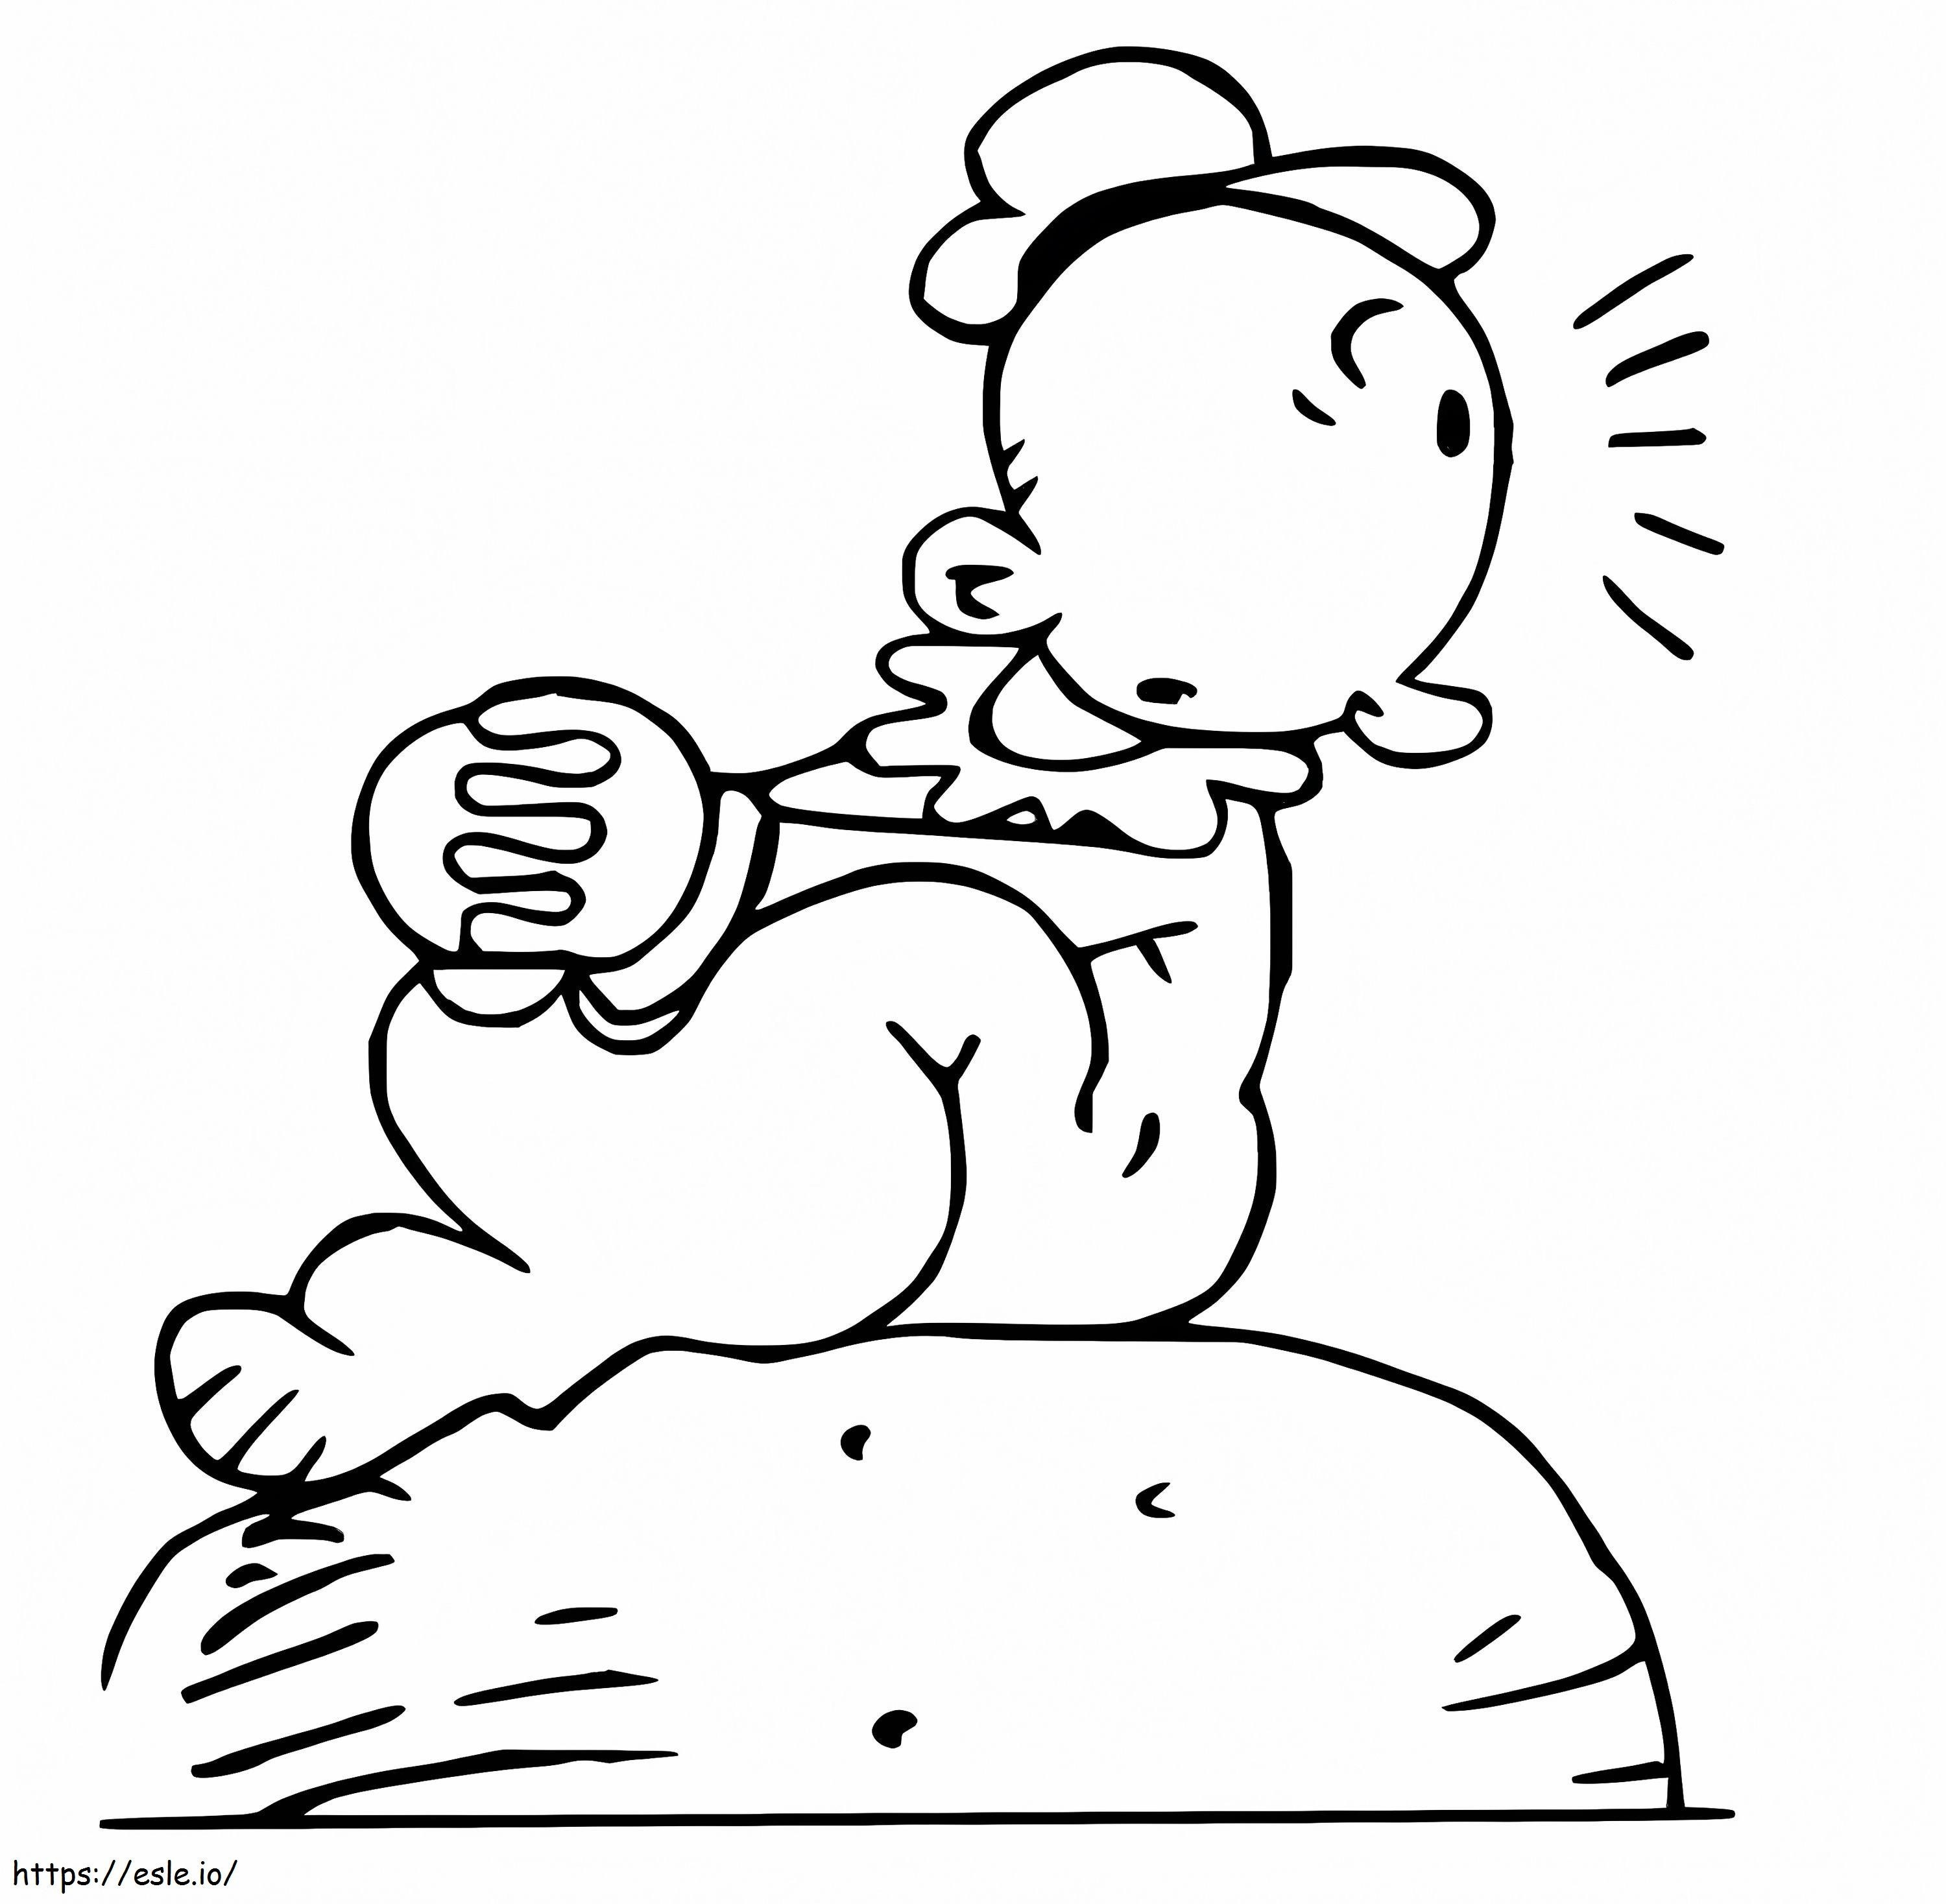 SweePea De Popeye coloring page